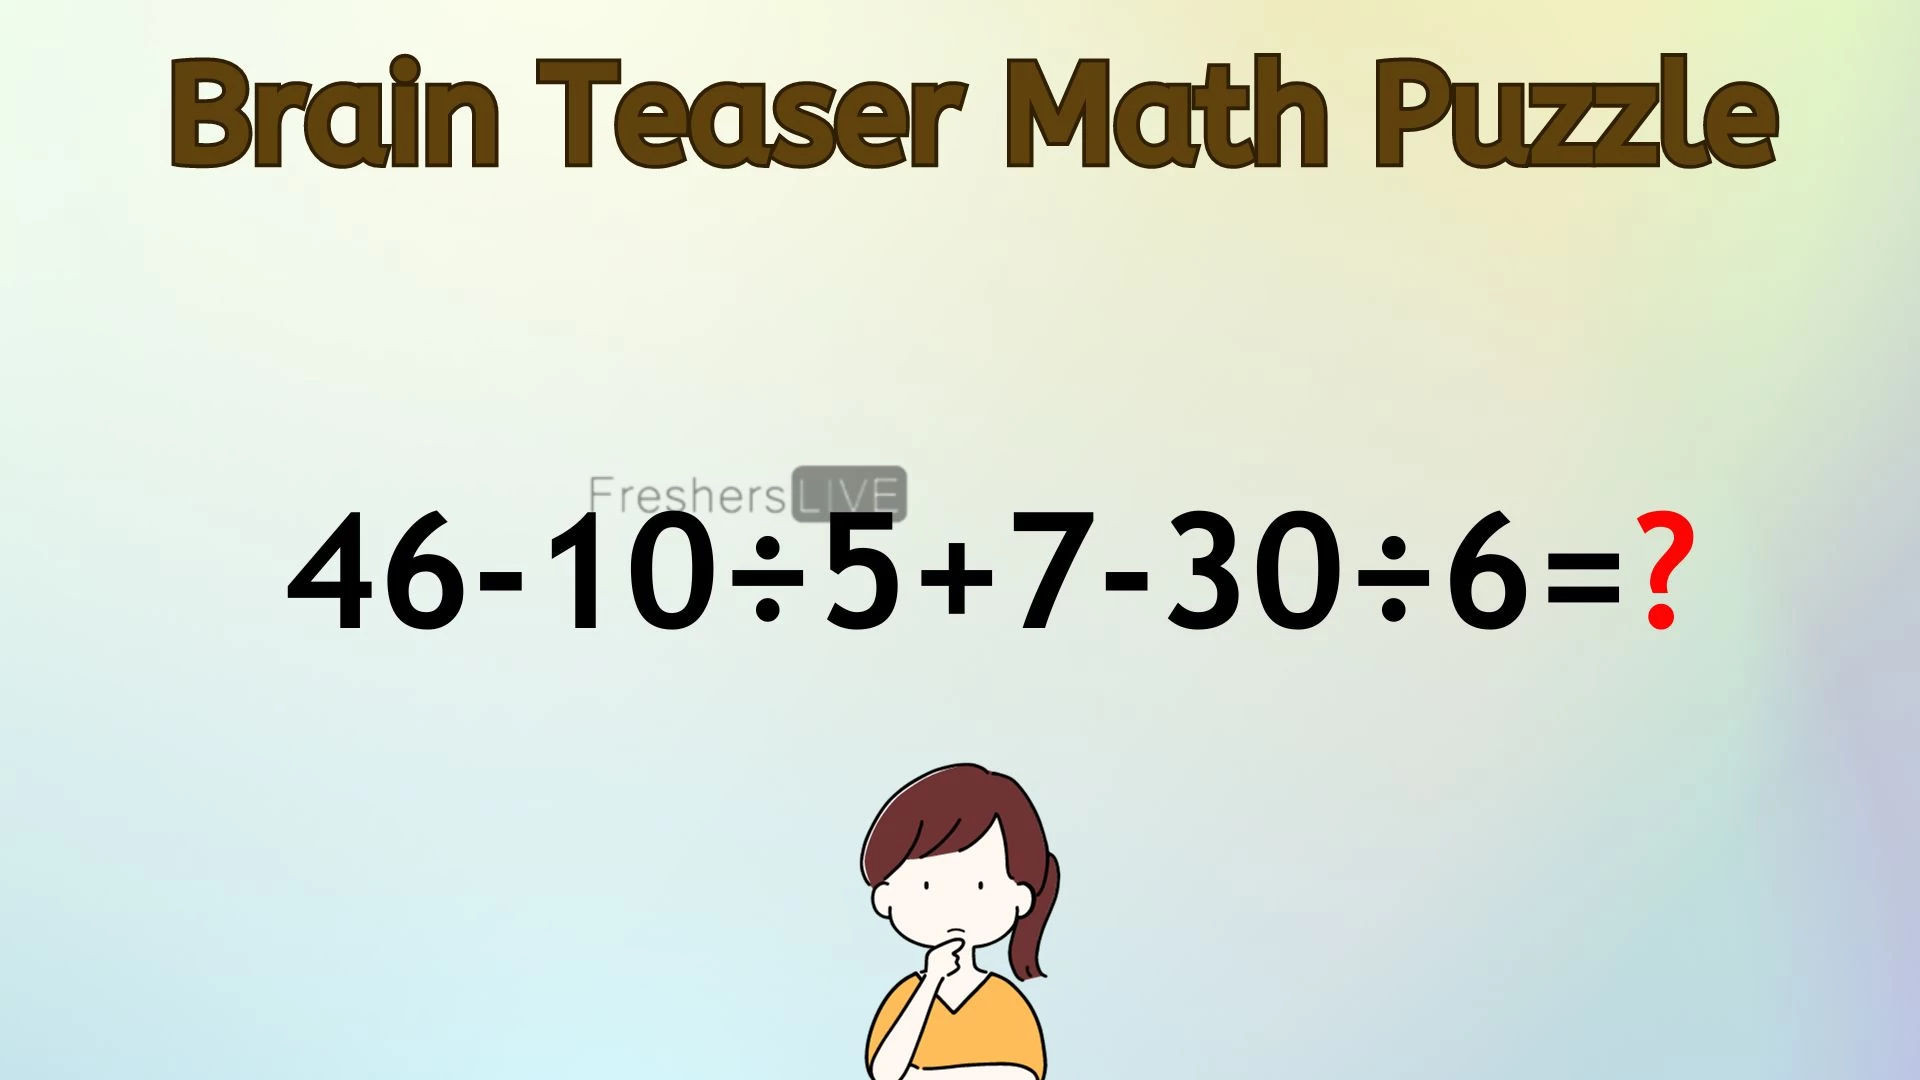 Can You Solve This Math Puzzle? Equate 46-10÷5+7-30÷6=?